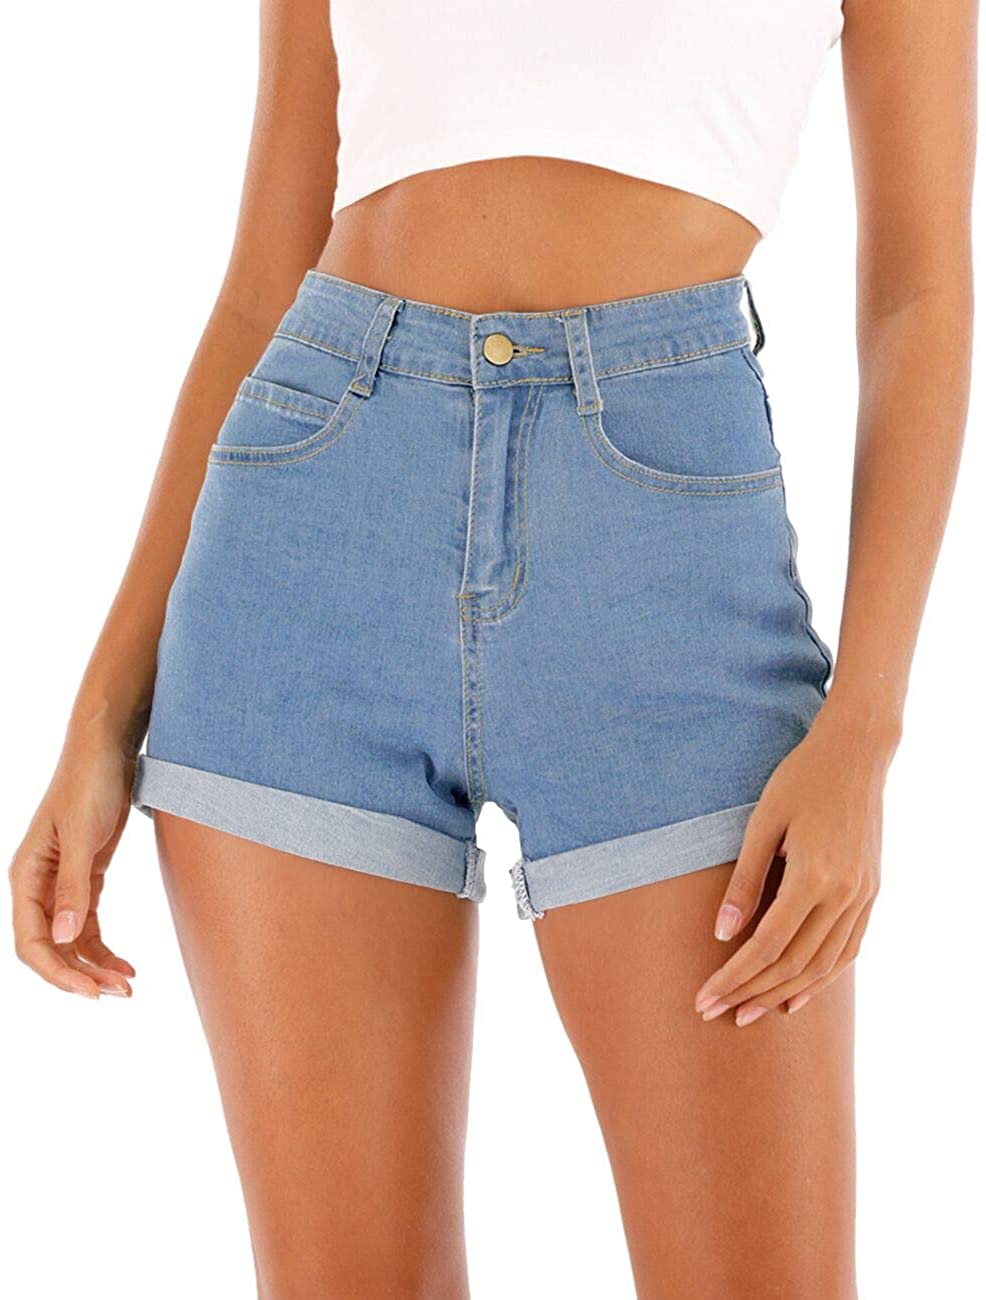 Lailezou Women's High Waist Denim Shorts Casual Classic Stretchy Folded Hem  Belt Washed Summer Sexy Shorts Jeans at  Women's Clothing store